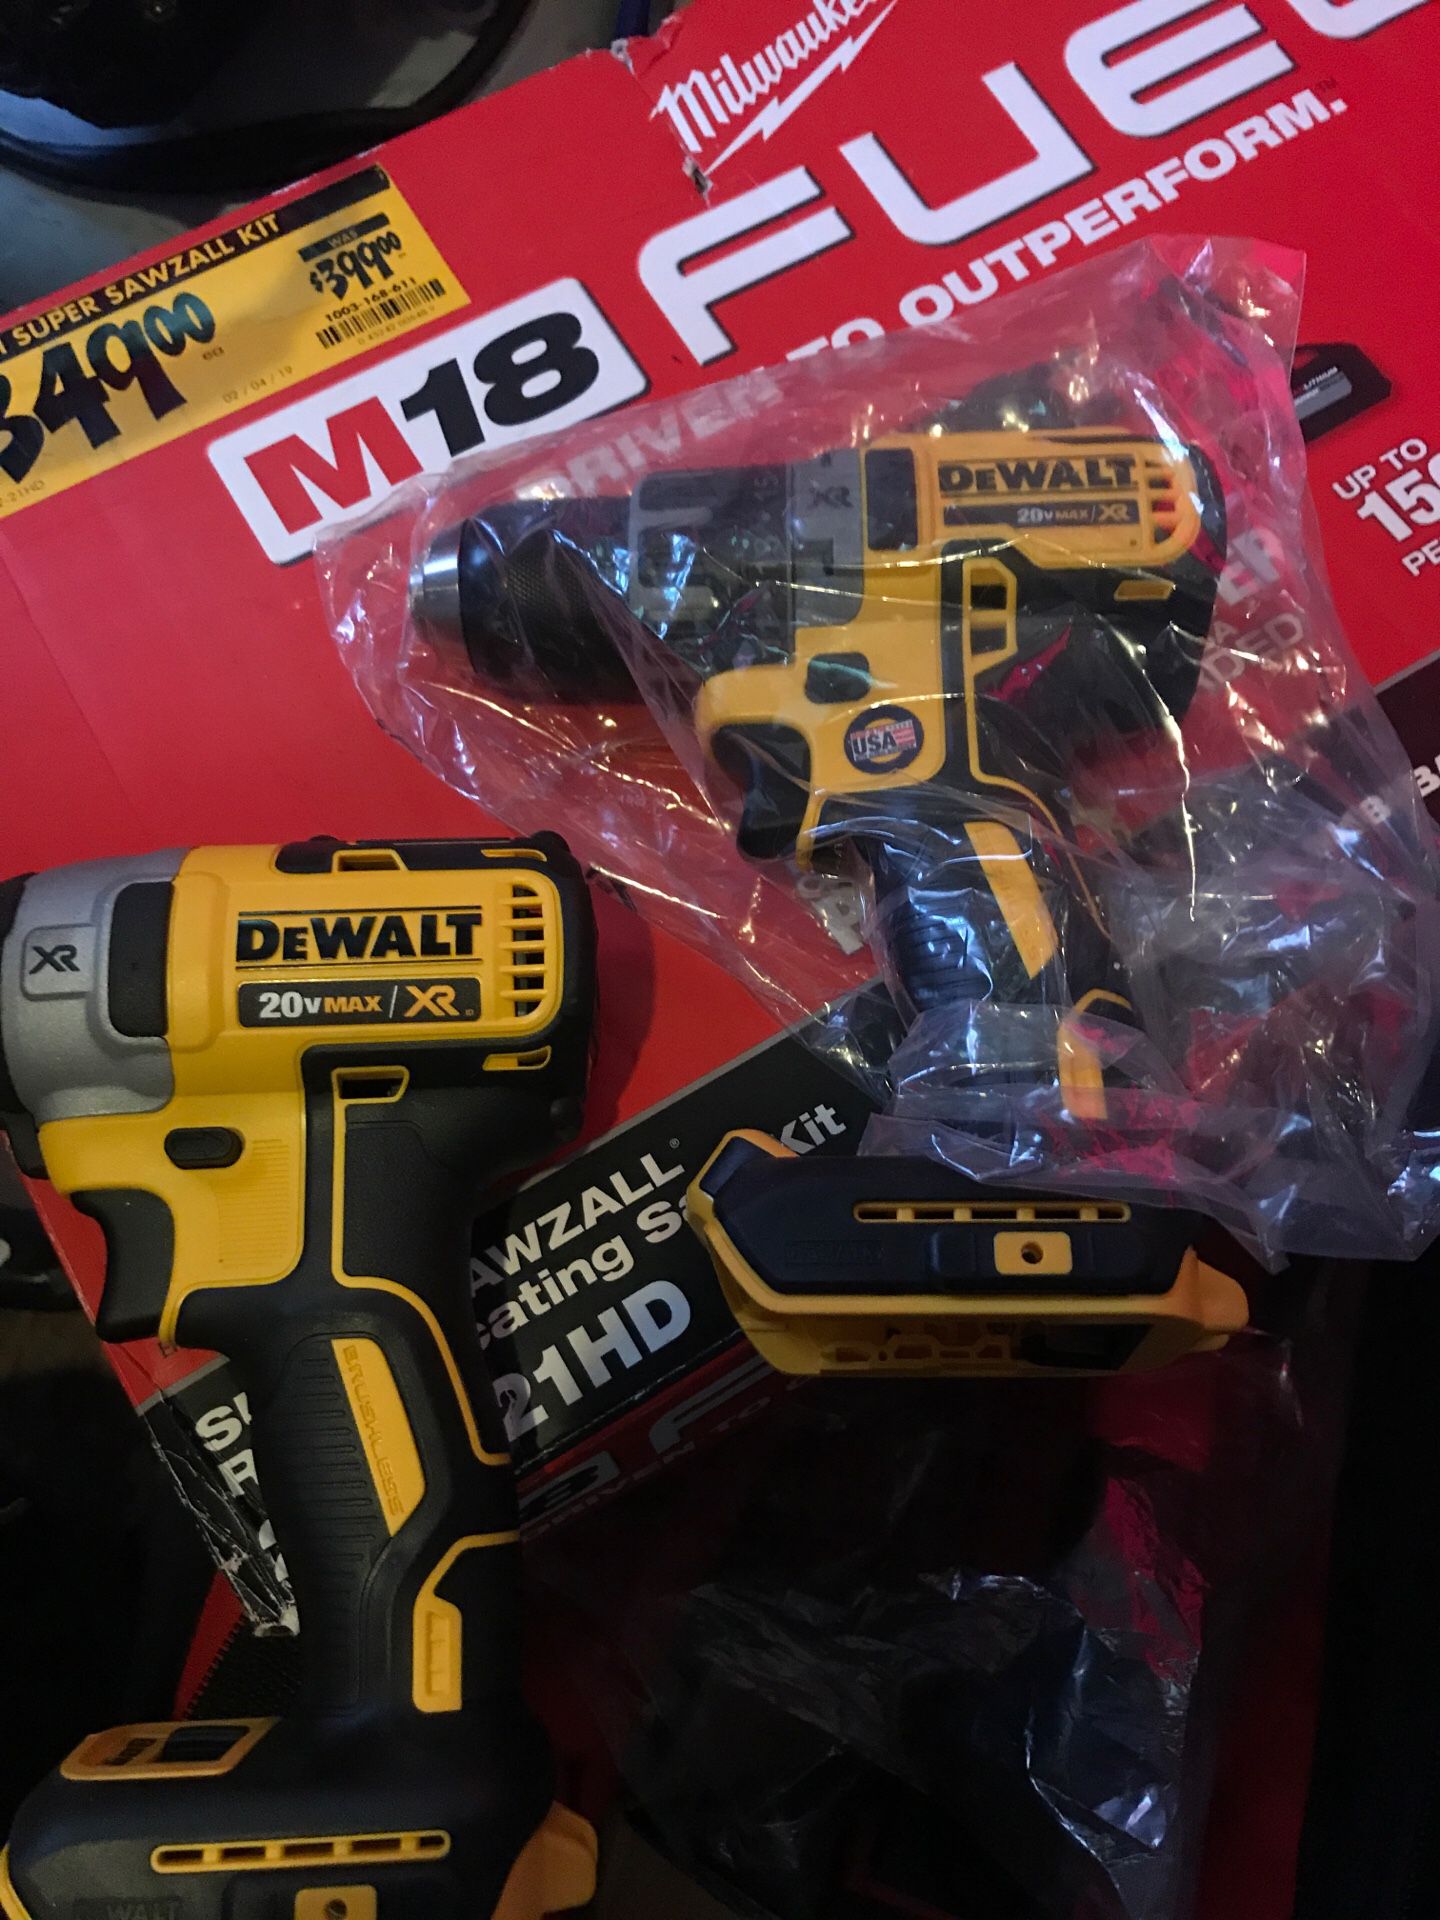 Dewalt impact and drill xr combo 2 2ah batteries and charger included